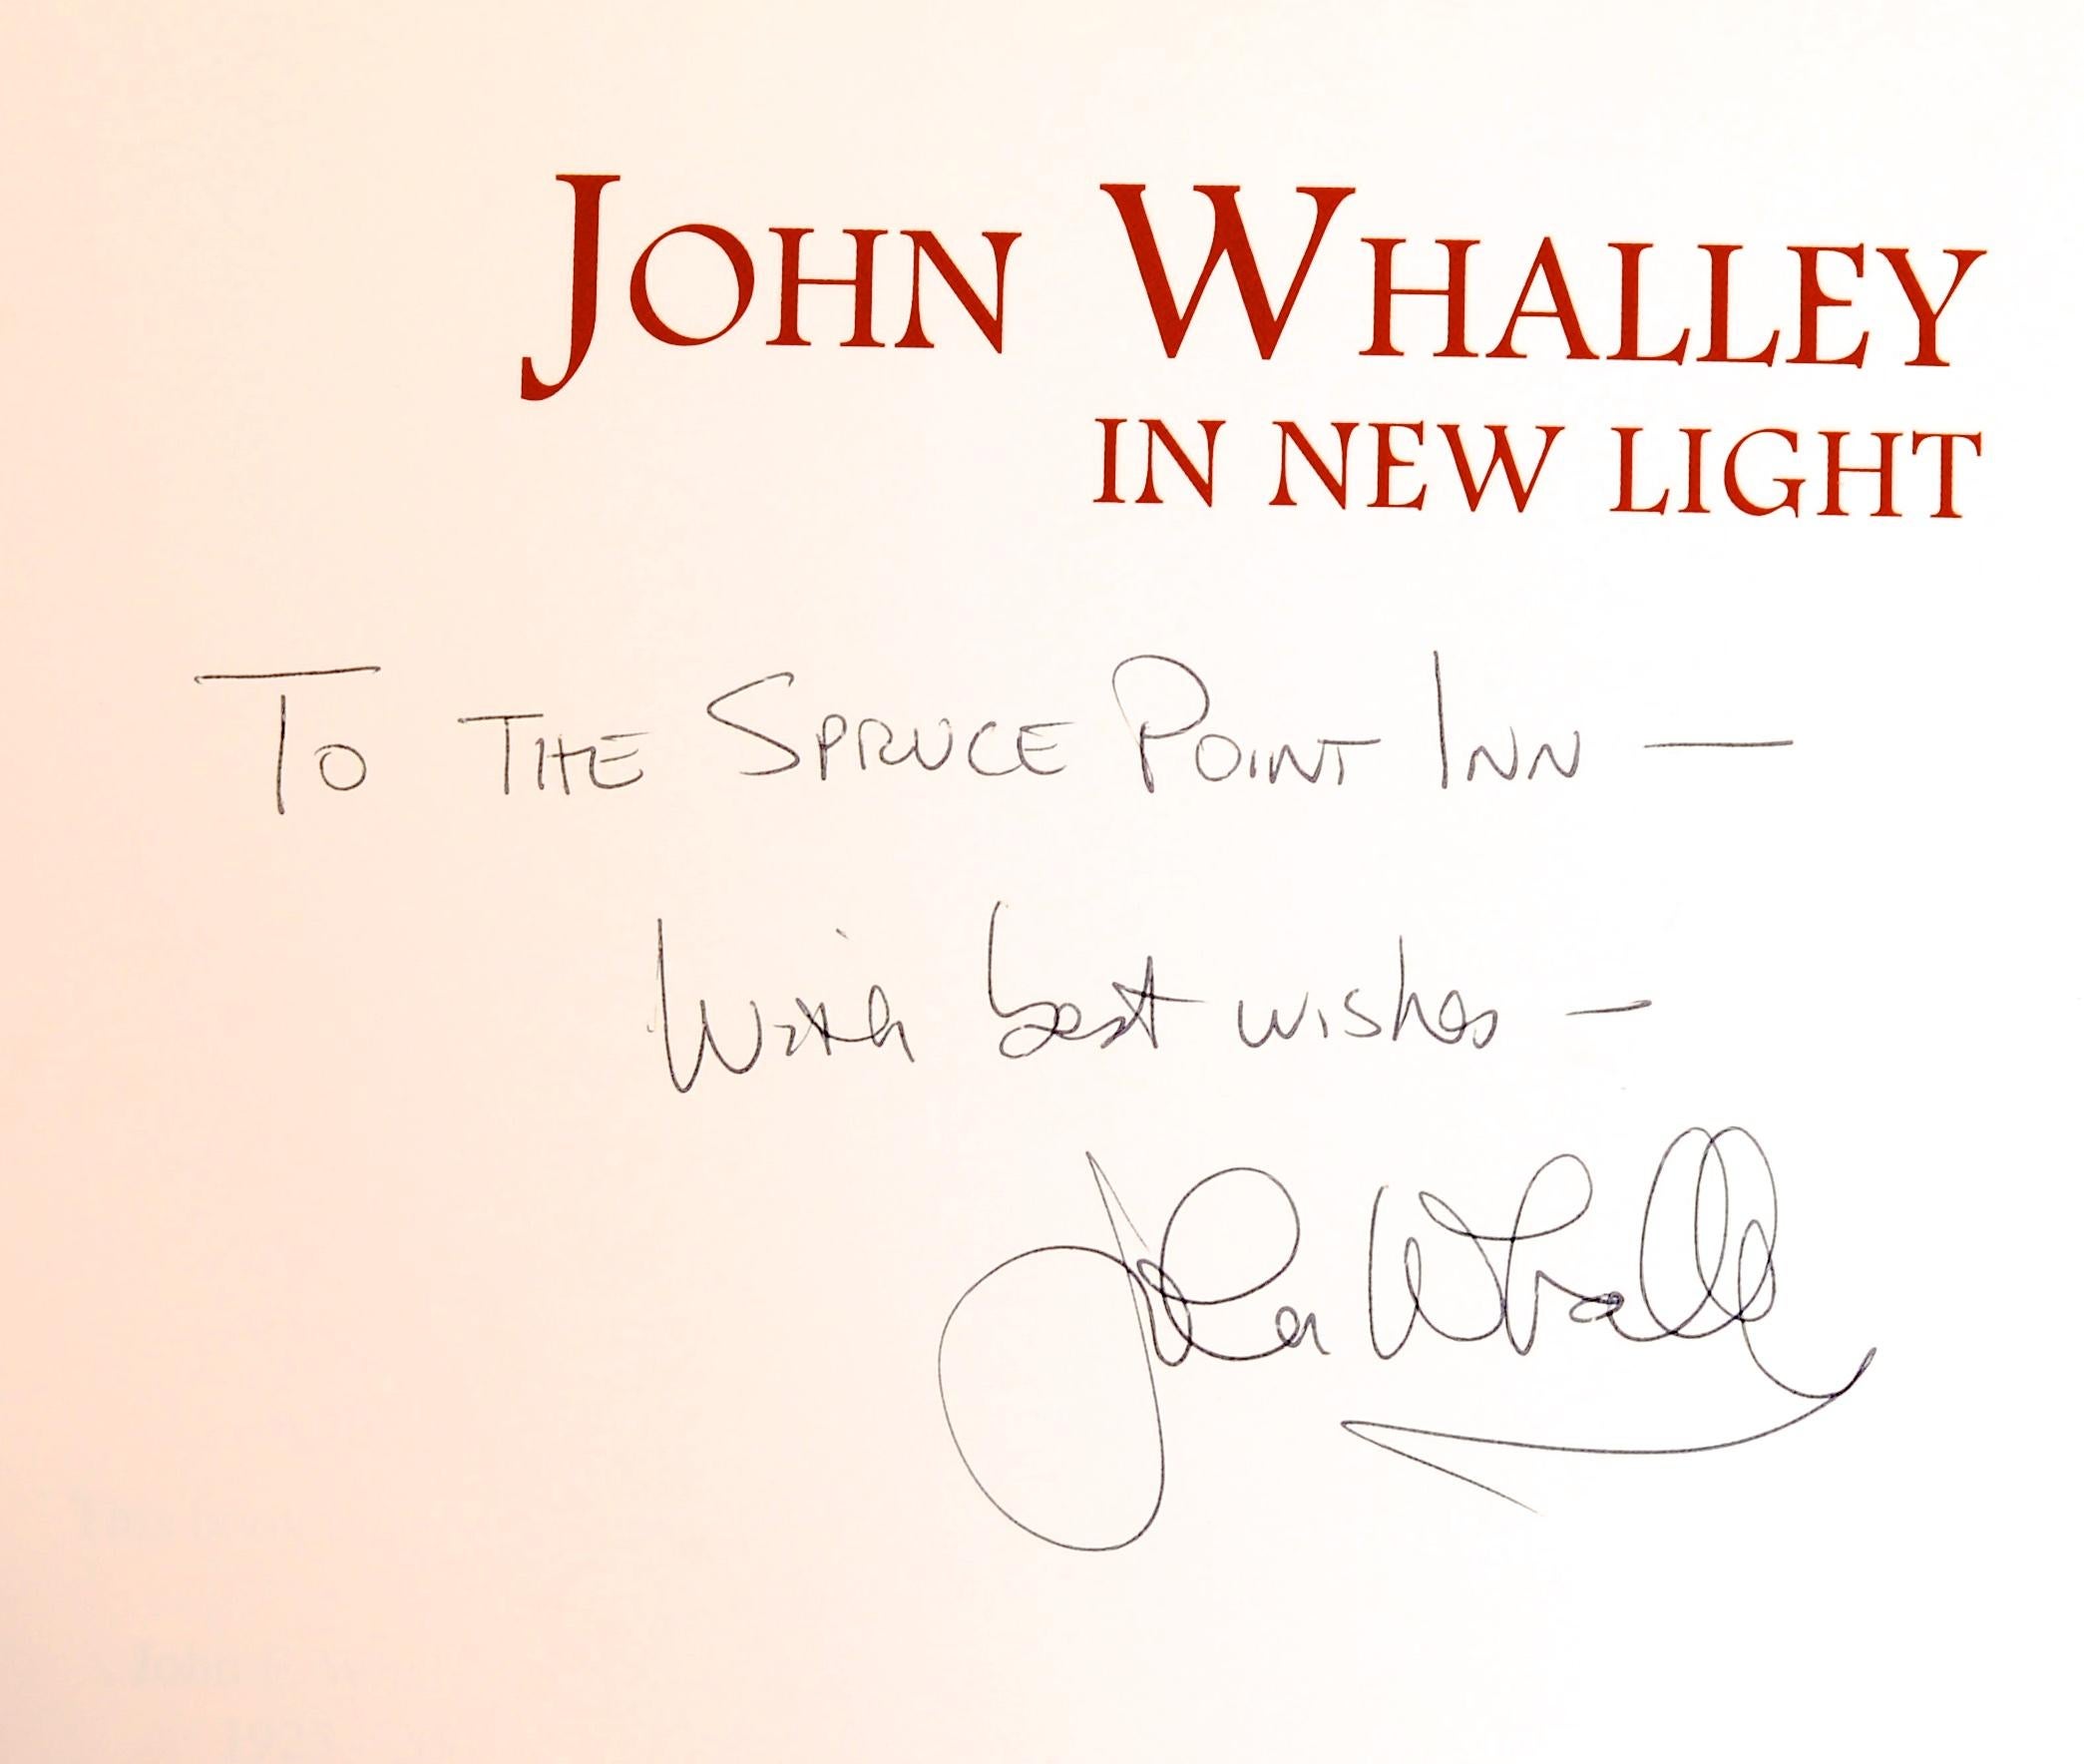 John Whalley: In New Light by John Whalley, Signed. Published by John Whalley Studio, ME, 2006. Signed 1st Ed hardcover no dust jacket. The Maine artist lives in Damariscotta. 